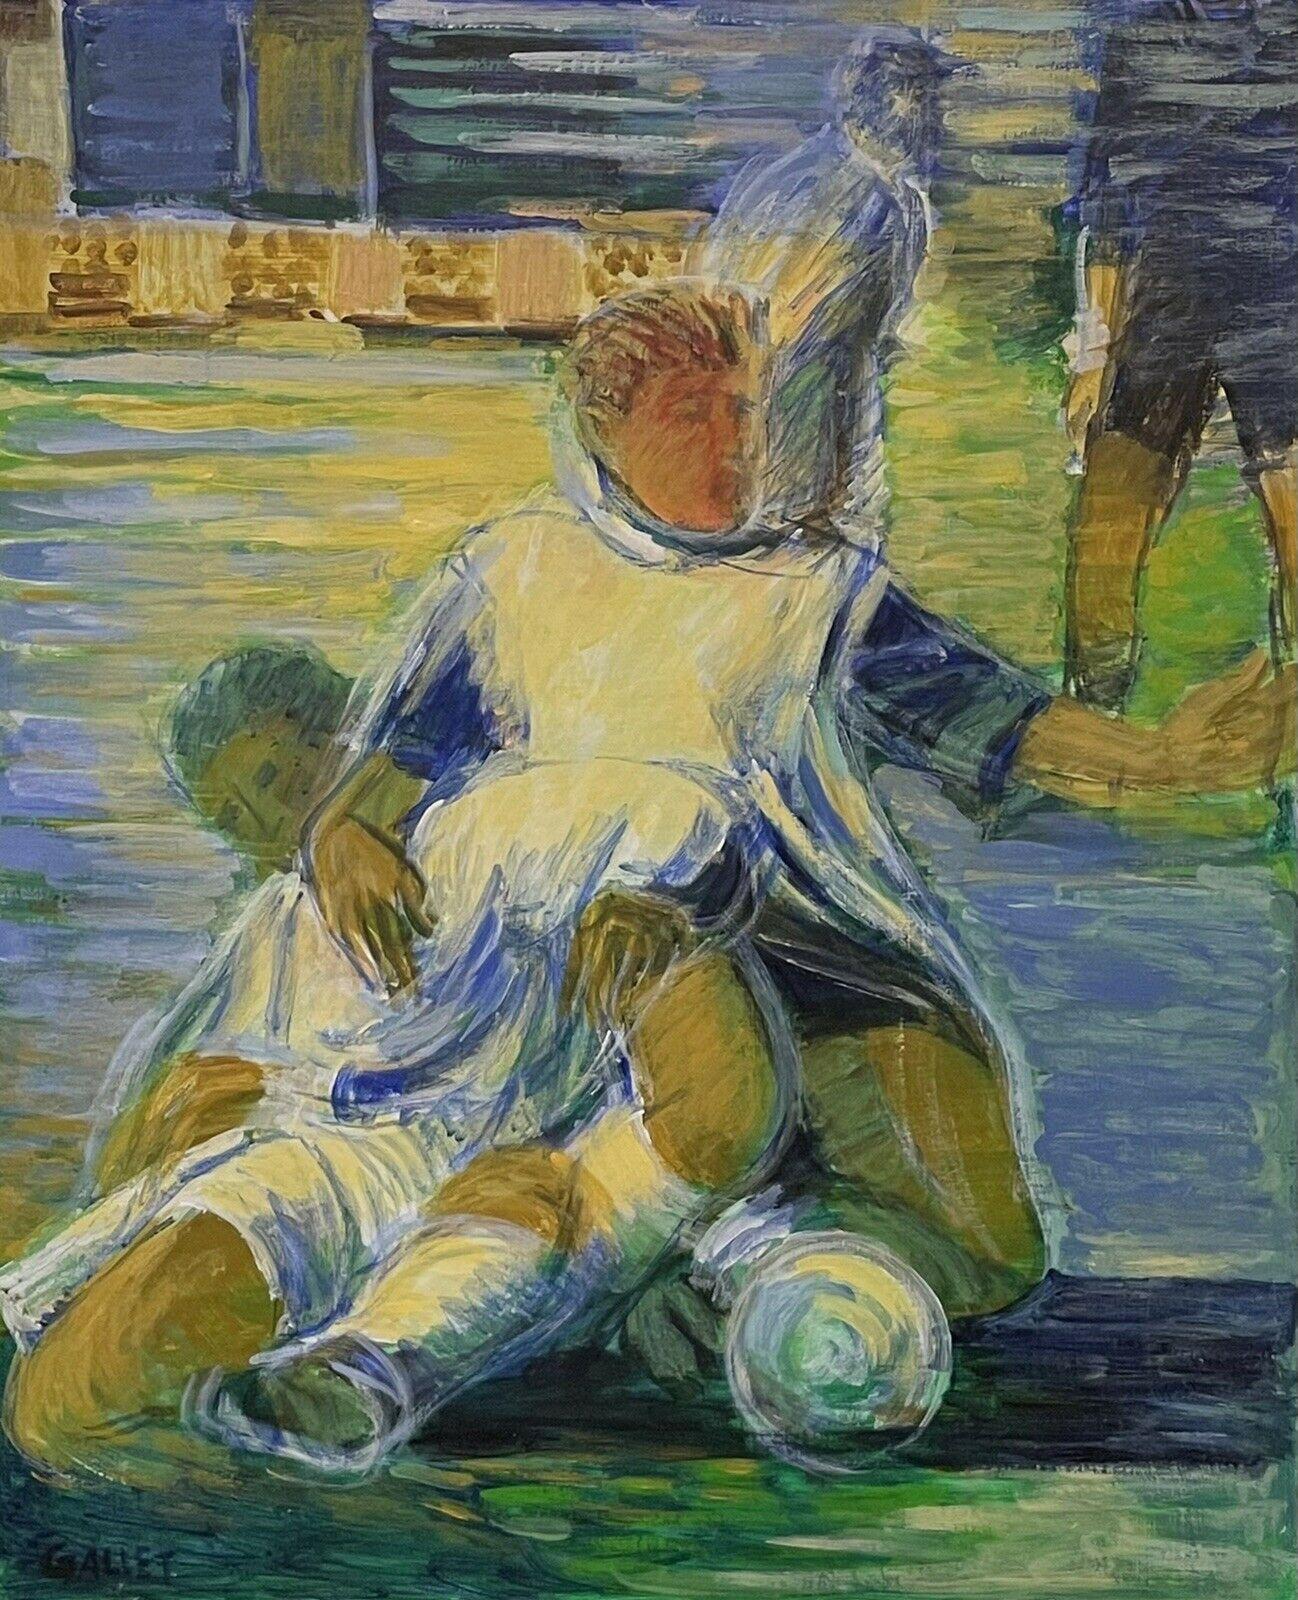 Jostne Gallet Figurative Painting - The Football Match, large original French 20th century oil painting